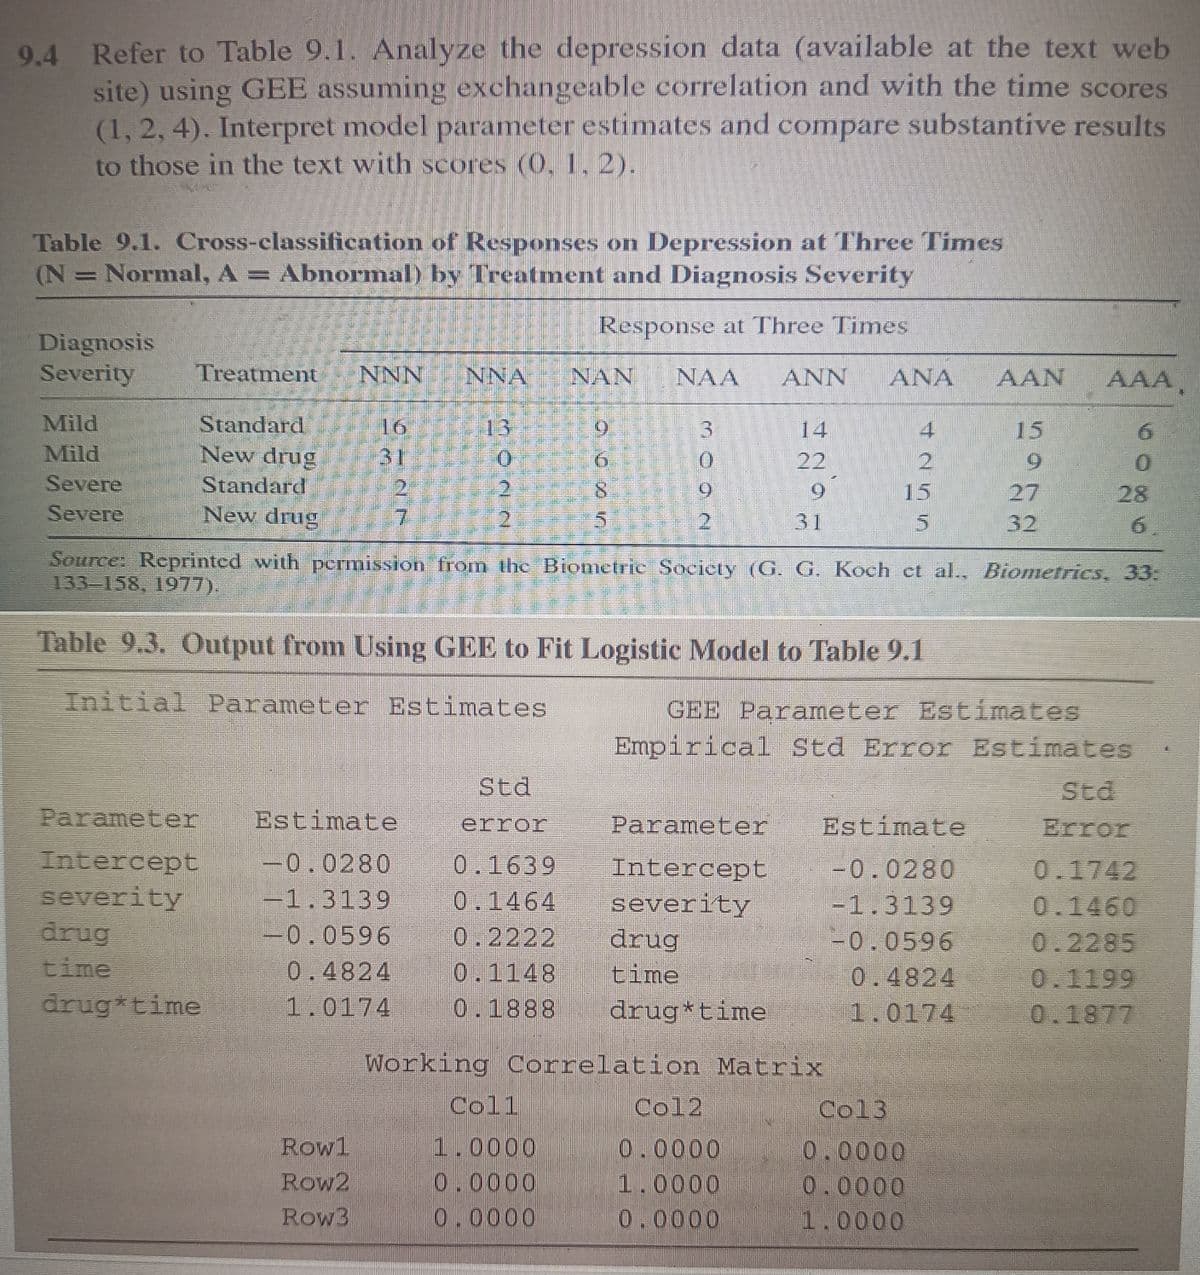 9.4 Refer to Table 9.1. Analyze the depression data (available at the text web
site) using GEE assuming exchangeable correlation and with the time scores
(1, 2, 4). Interpret model parameter estimates and compare substantive results
to those in the text with scores (0, 1, 2).
Table 9.1. Cross-classification of Responses on Depression at Three Times
(N = Normal, A = Abnormal) by Treatment and Diagnosis Severity
Response at Three Times
Diagnosis
Severity
Treatment NNN NNA
NAN NAA ANN
ANA AAN
AAA,
Mild
Standard
16
13
9
Mild
New drug
31
0
6
Severe
Standard
Severe
New drug
2
7
2
8
5
MOON
3
14
0
22
9
9
15
2
31
5222
4255
15
6
27
0
28
32
6.
Source: Reprinted with permission from the Biometric Society (G. G. Koch et al., Biometrics, 33:
133-158, 1977).
Table 9.3. Output from Using GEE to Fit Logistic Model to Table 9.1
Initial Parameter Estimates
GEE Parameter Estimates
Empirical Std Error Estimates
Parameter Estimate
Intercept
-0.0280
Std
error
0.1639
Std
Parameter Estimate
Error
Intercept
-0.0280
0.1742
severity
-1.3139
0.1464
severity
-1.3139
0.1460
drug
-0.0596
0.2222
drug
-0.0596
0.2285
time
0.4824
0.1148 time
0.4824
0.1199
drug time
1.0174
0.1888 drug*time
1.0174
0.1877
Working Correlation Matrix
Coll
Co12
Co13
Rowl
1.0000
0.0000
0.0000
Row2
0.0000
1.0000
0.0000
Row3
0.0000
0.0000
1.0000